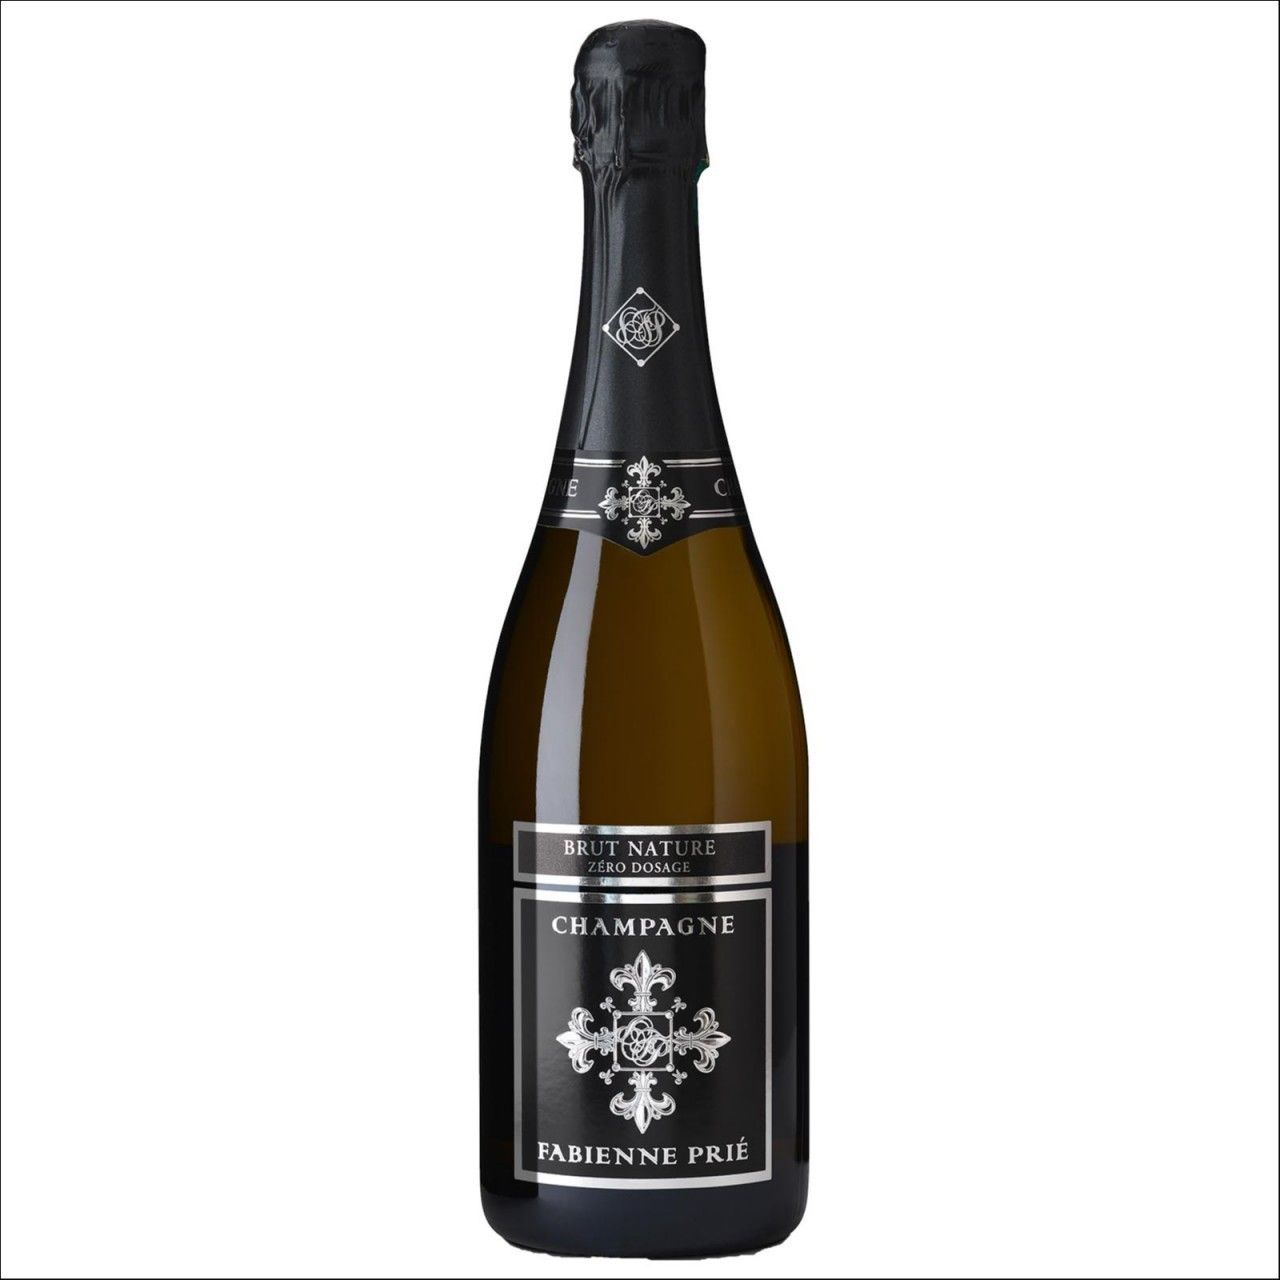 CHRYSOBULLE BY PRIE - CHAMPAGNE - Troyes : Brut nature